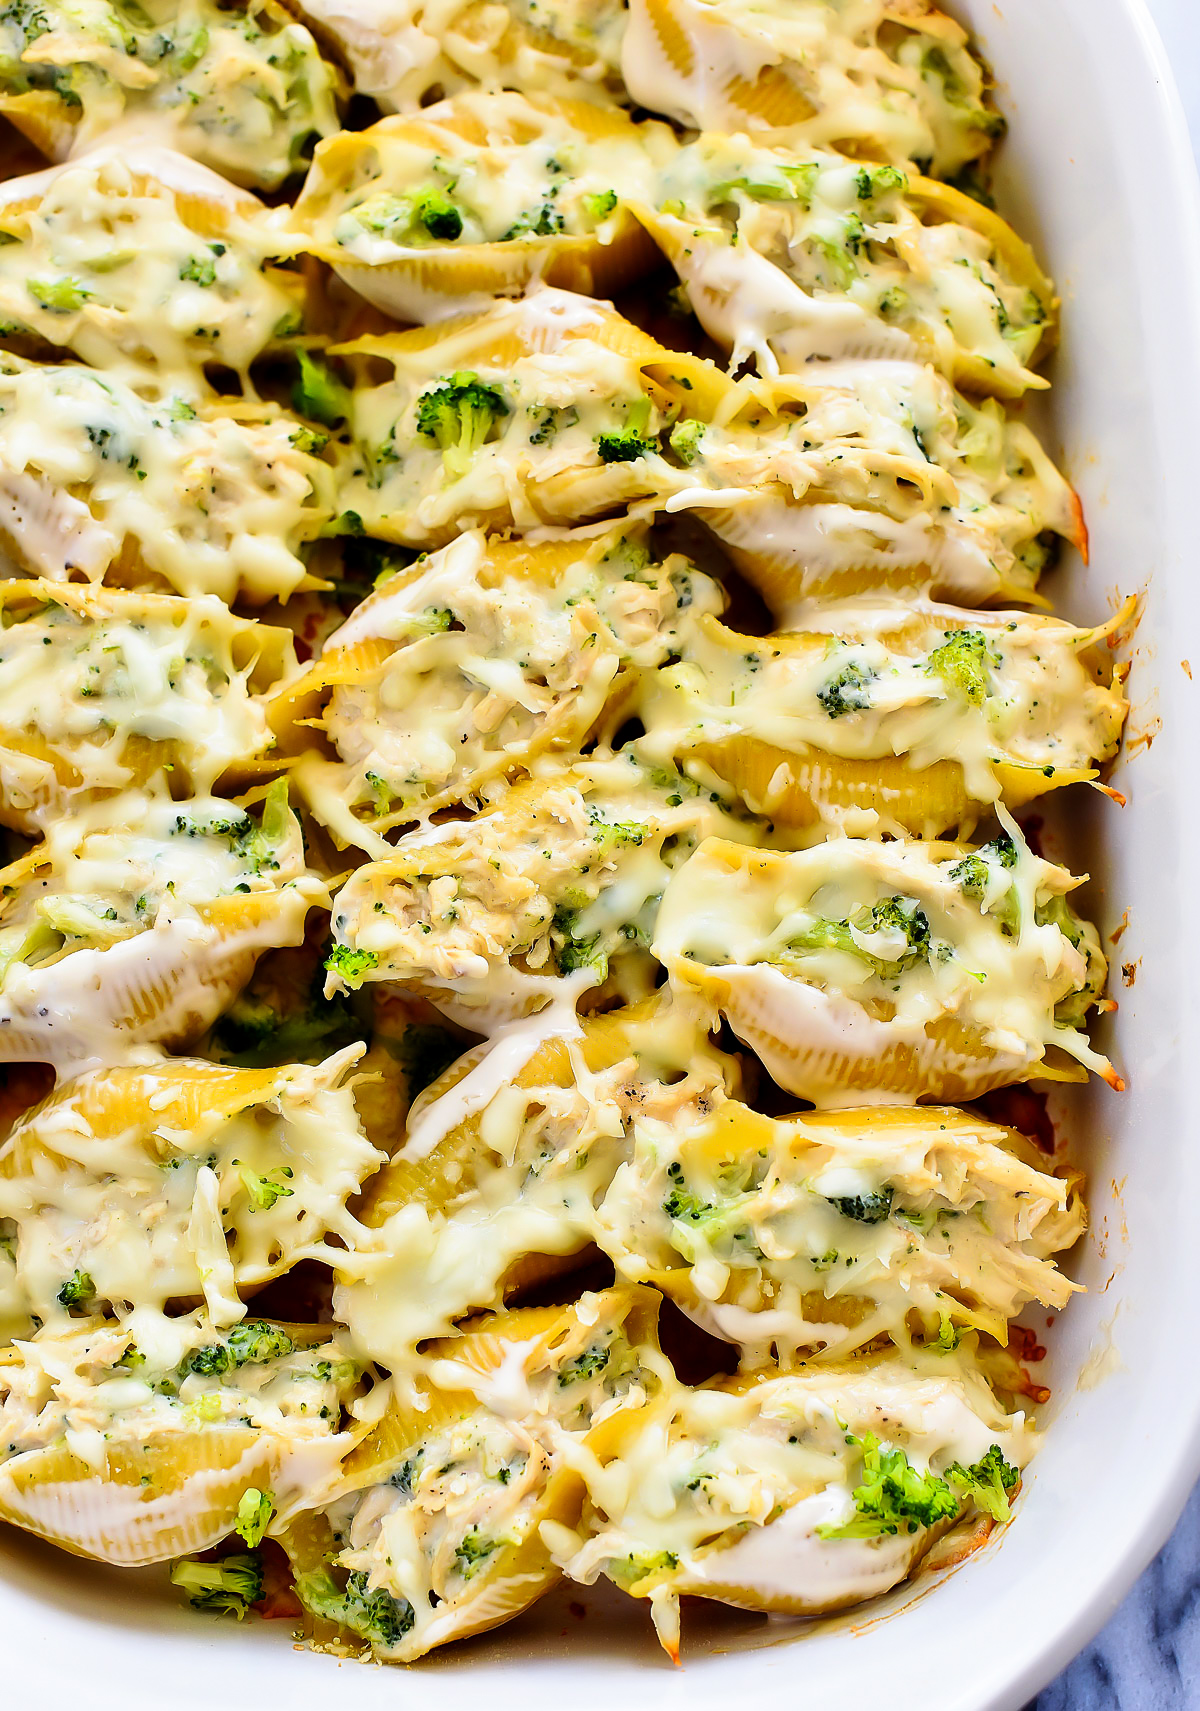 Chicken & Broccoli Alfredo Stuffed Shells is shredded chicken and broccoli combined with Alfredo sauce and stuffed inside jumbo pasta shells. Life-in-the-Lofthouse.com